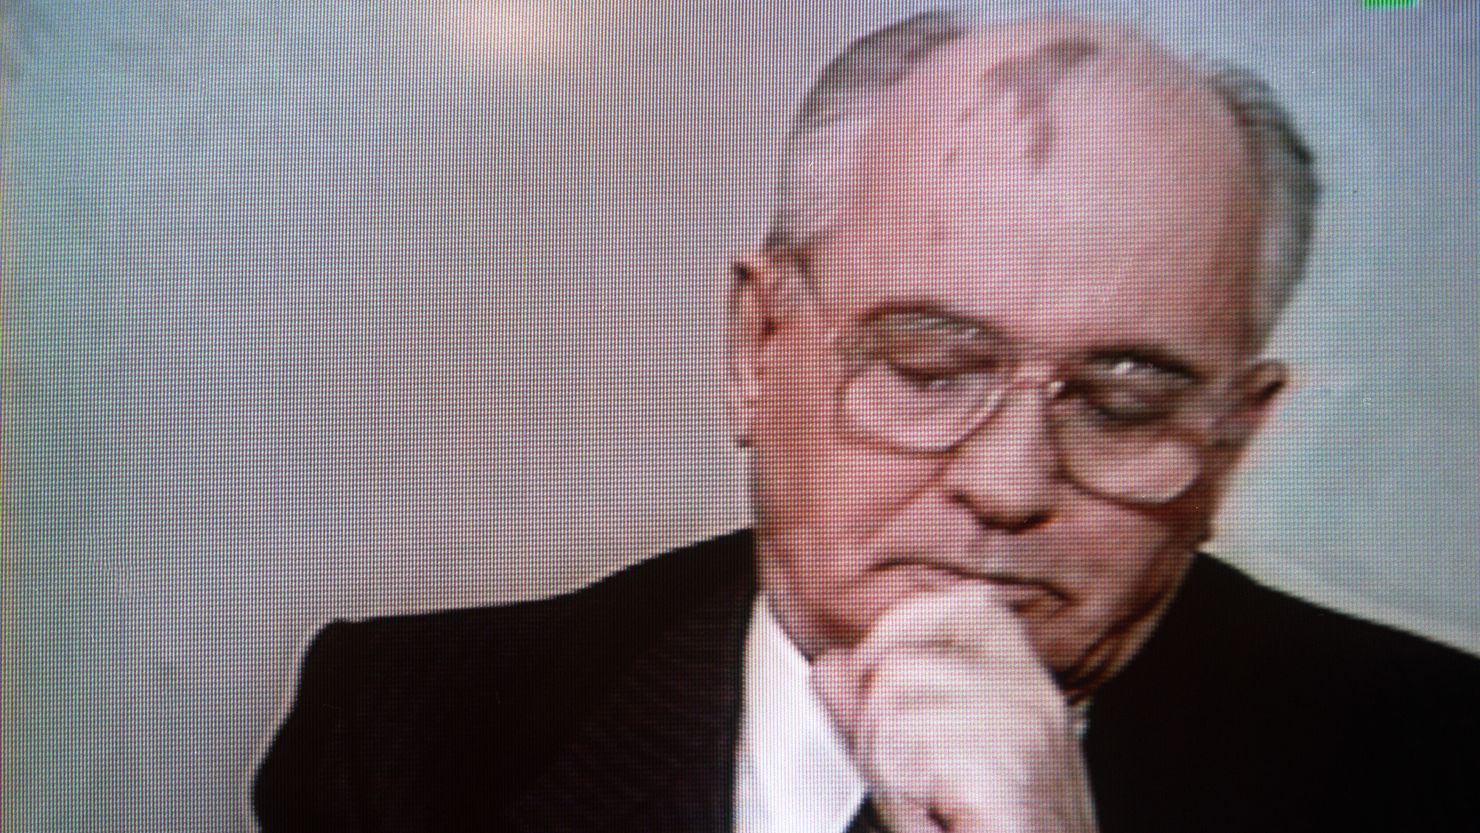 Soviet President Mikhail Gorbachev looks downcast as he announces his resignation on a TV image taken in Moscow on December 25, 1991. Gorbachev thus ended nearly seven years of power and signaled the end of the Soviet Union, which had begun in 1917 with a revolution.